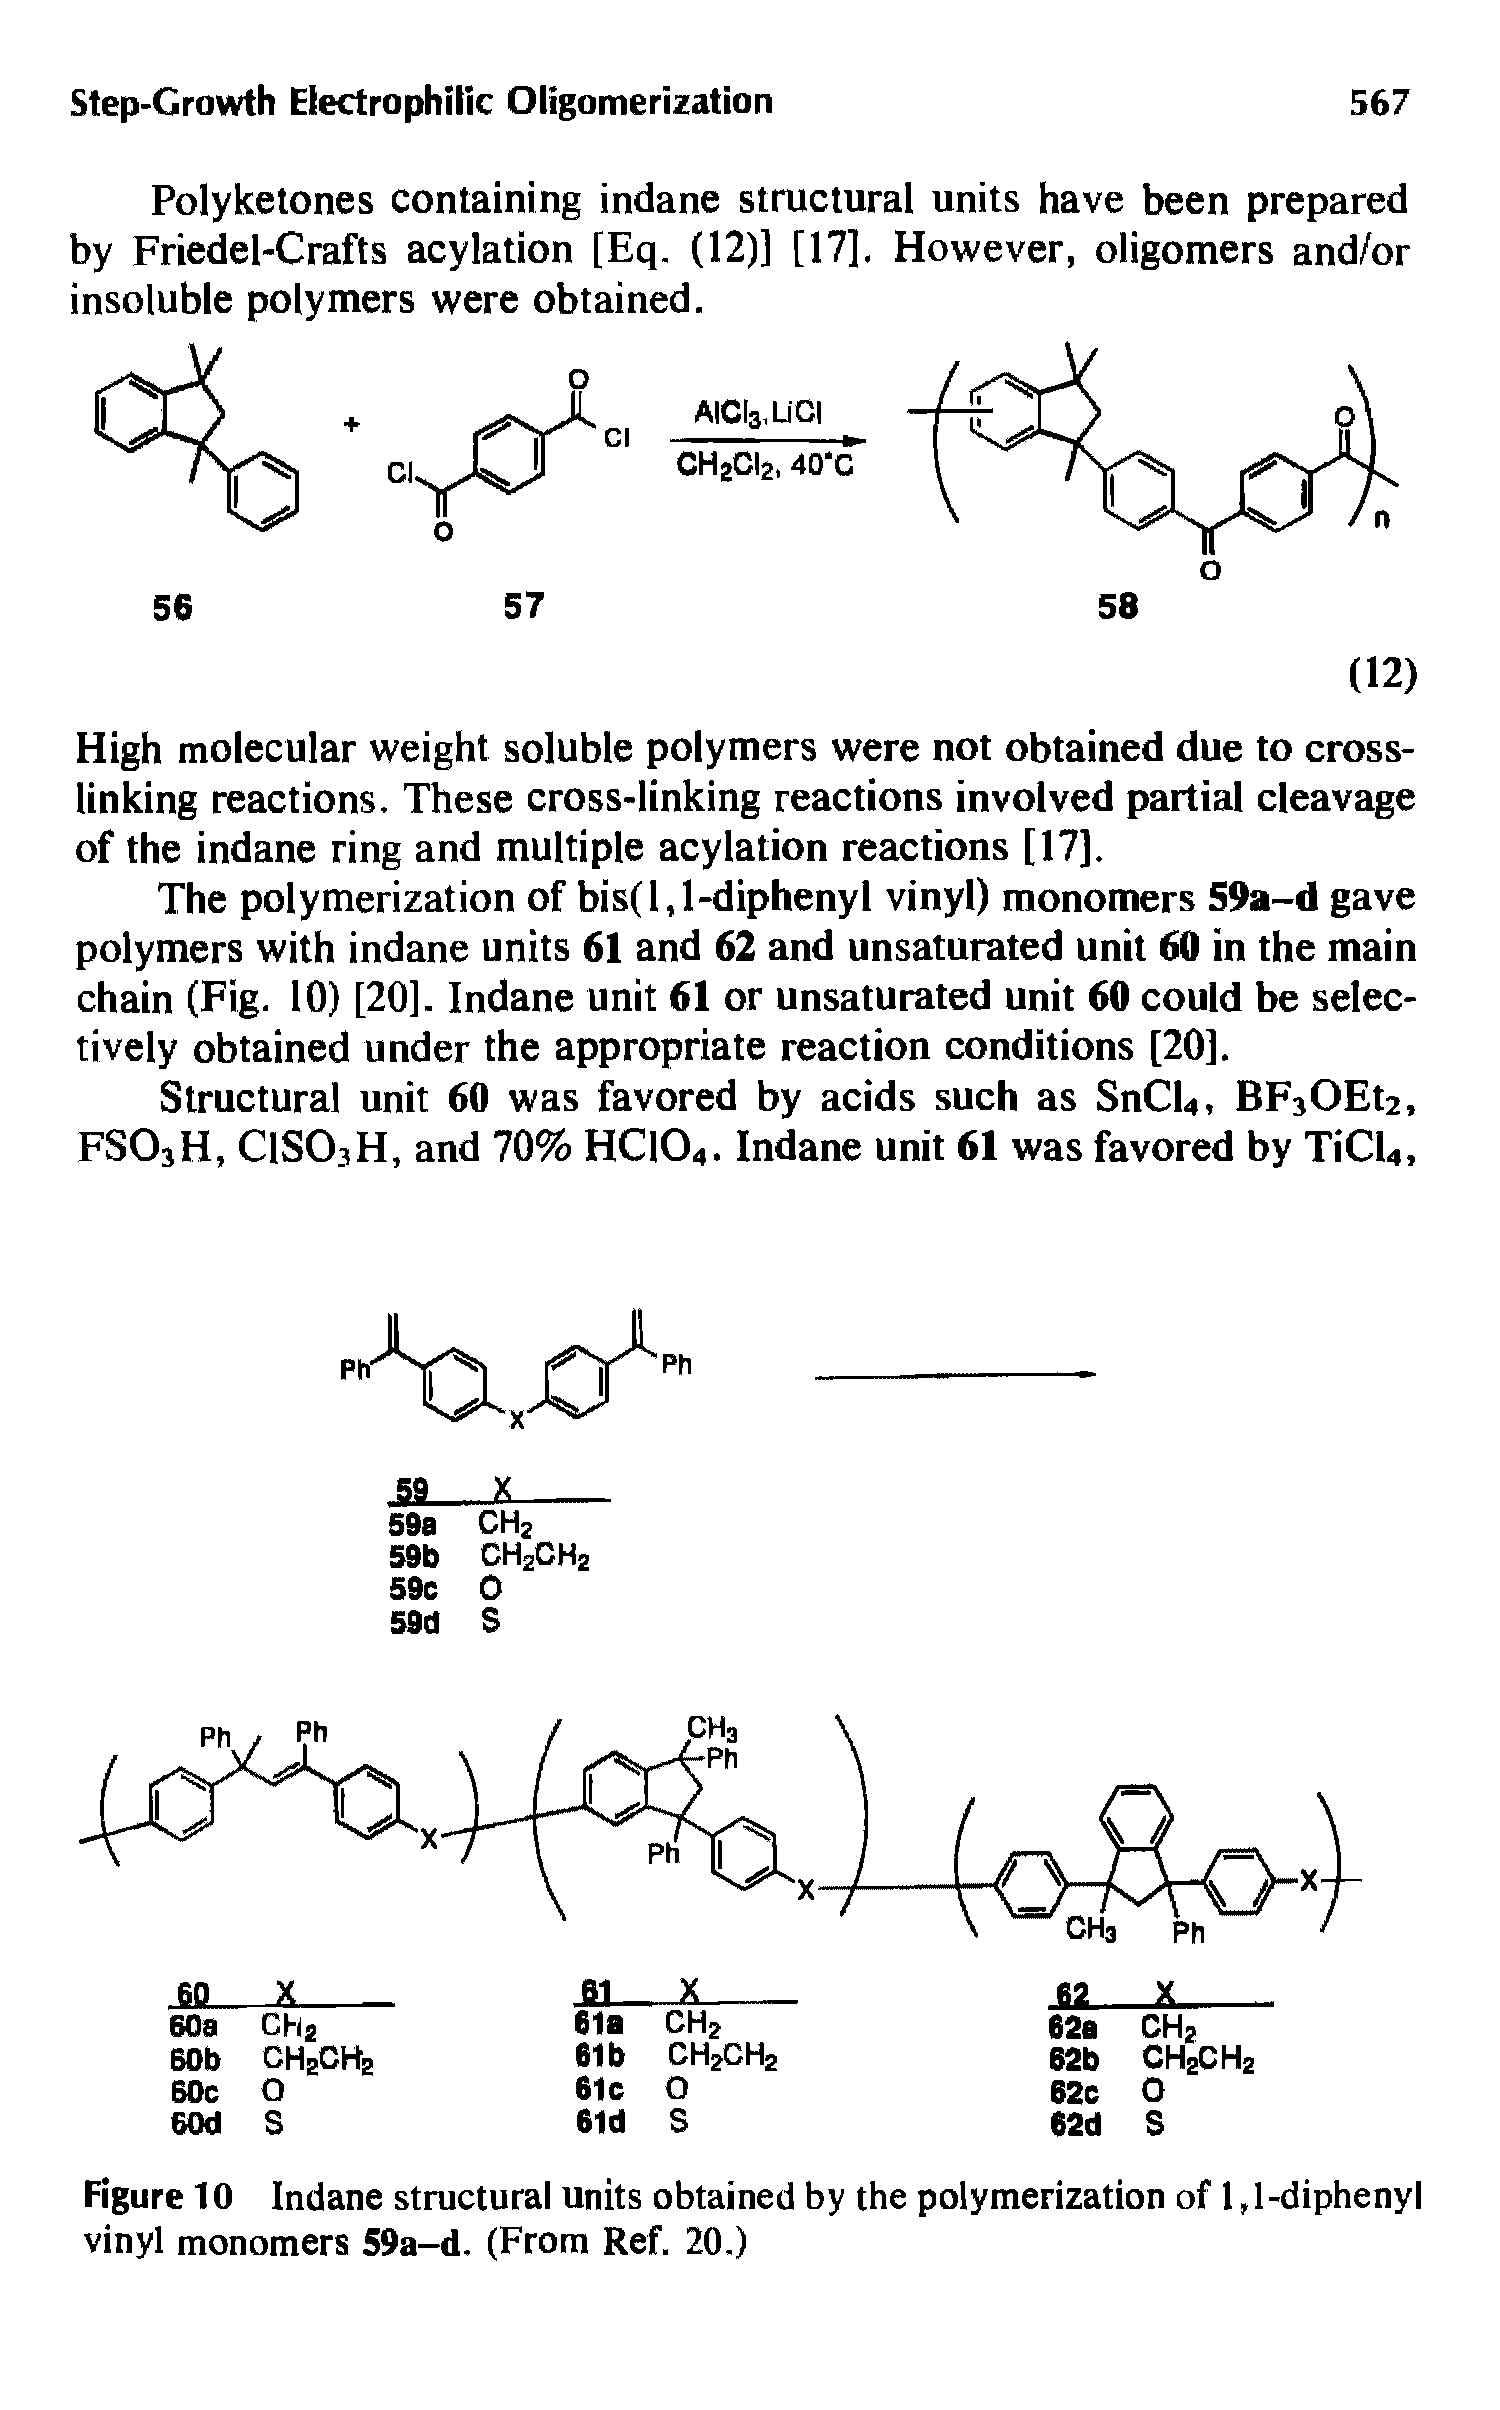 Figure 10 Indane structural units obtained by the polymerization of 1,1-diphenyl vinyl monomers 59a-d. (From Ref. 20.)...